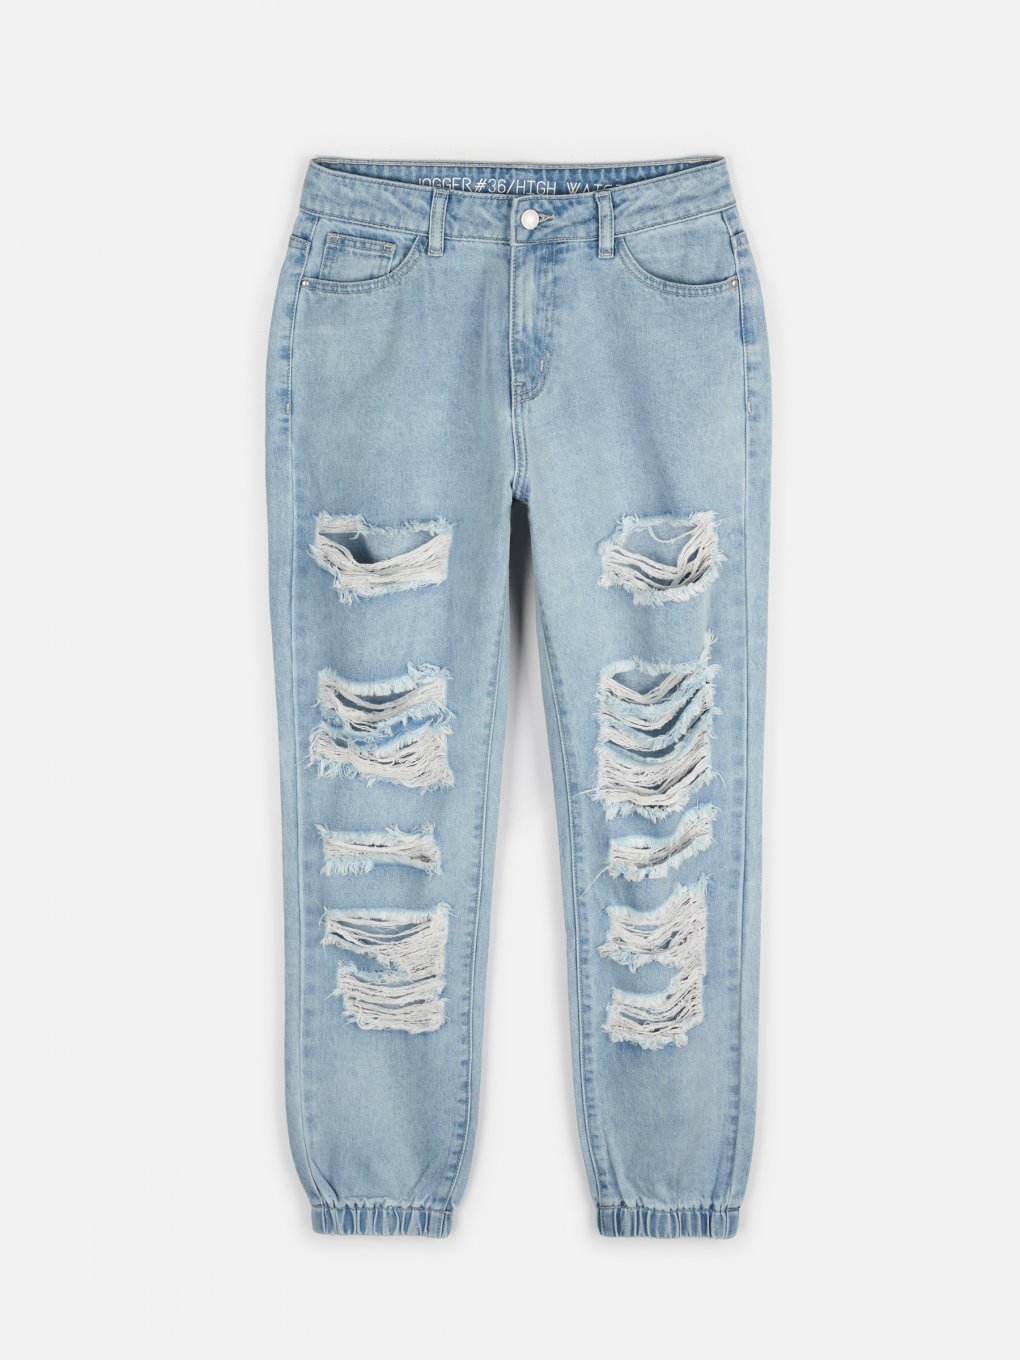 Jogger jeans with damages